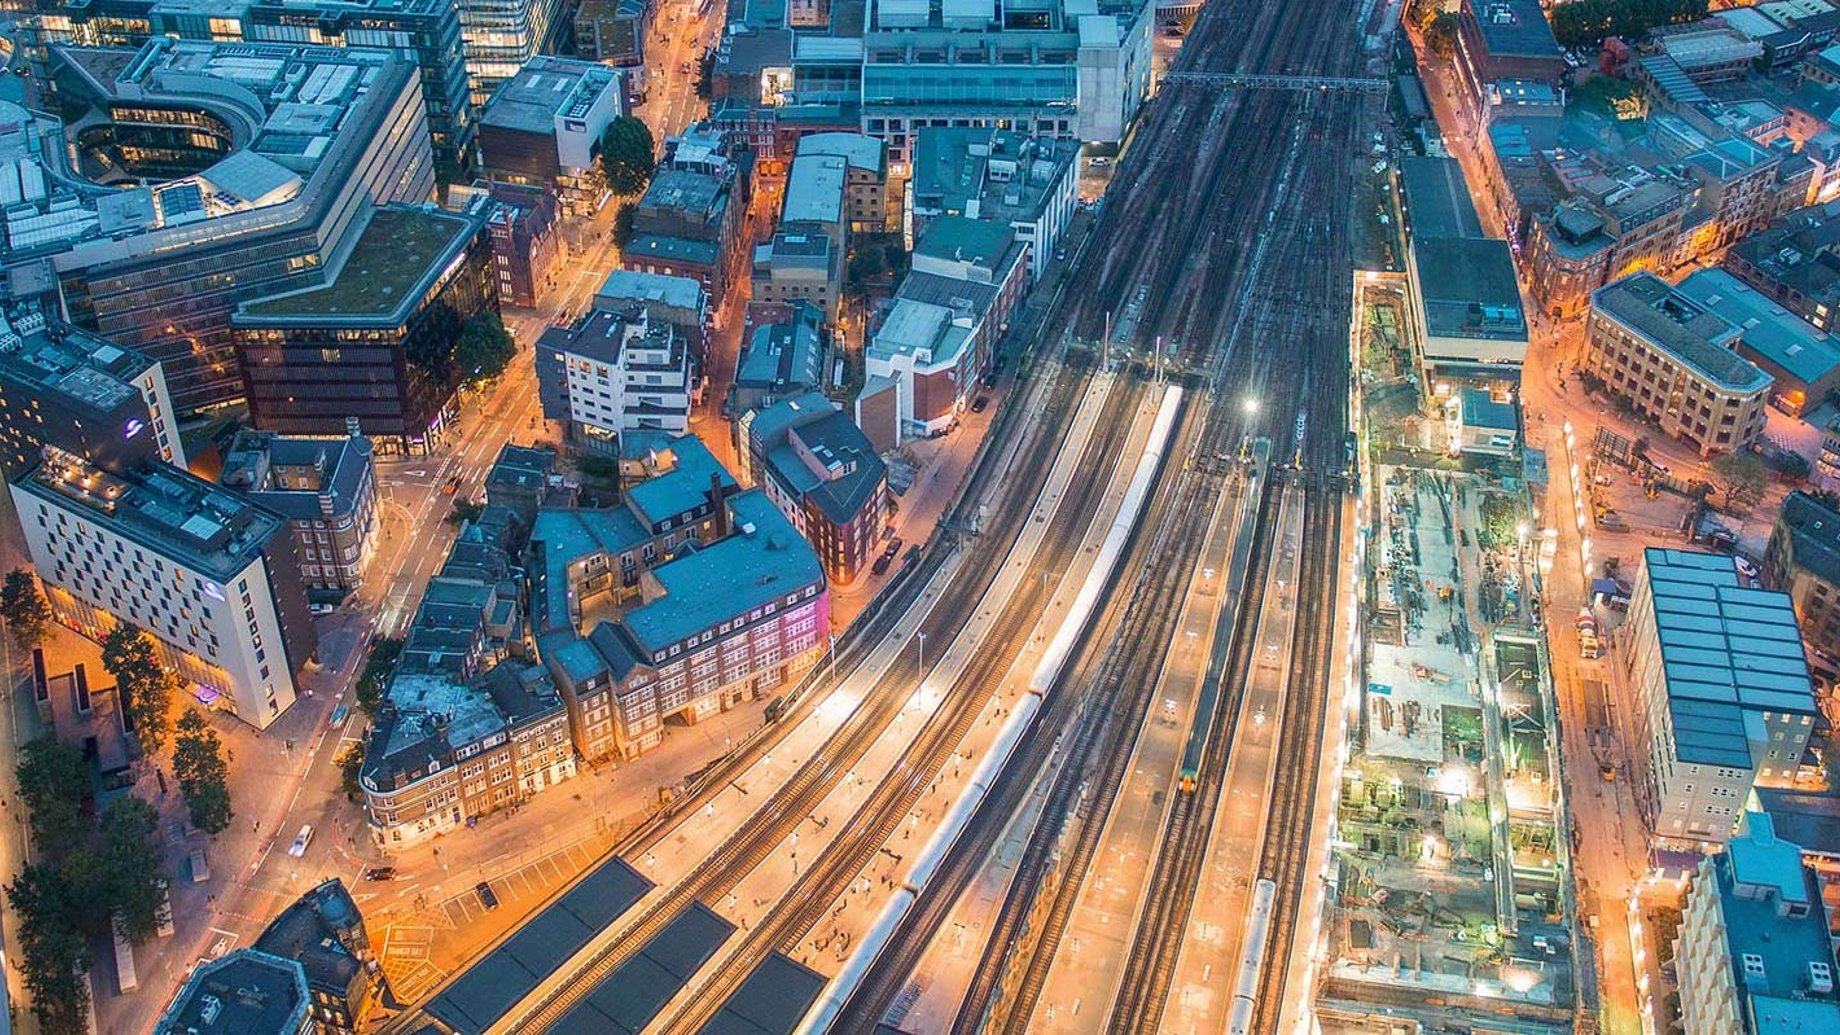 Aerial view of tracks approaching London Bridge station at night